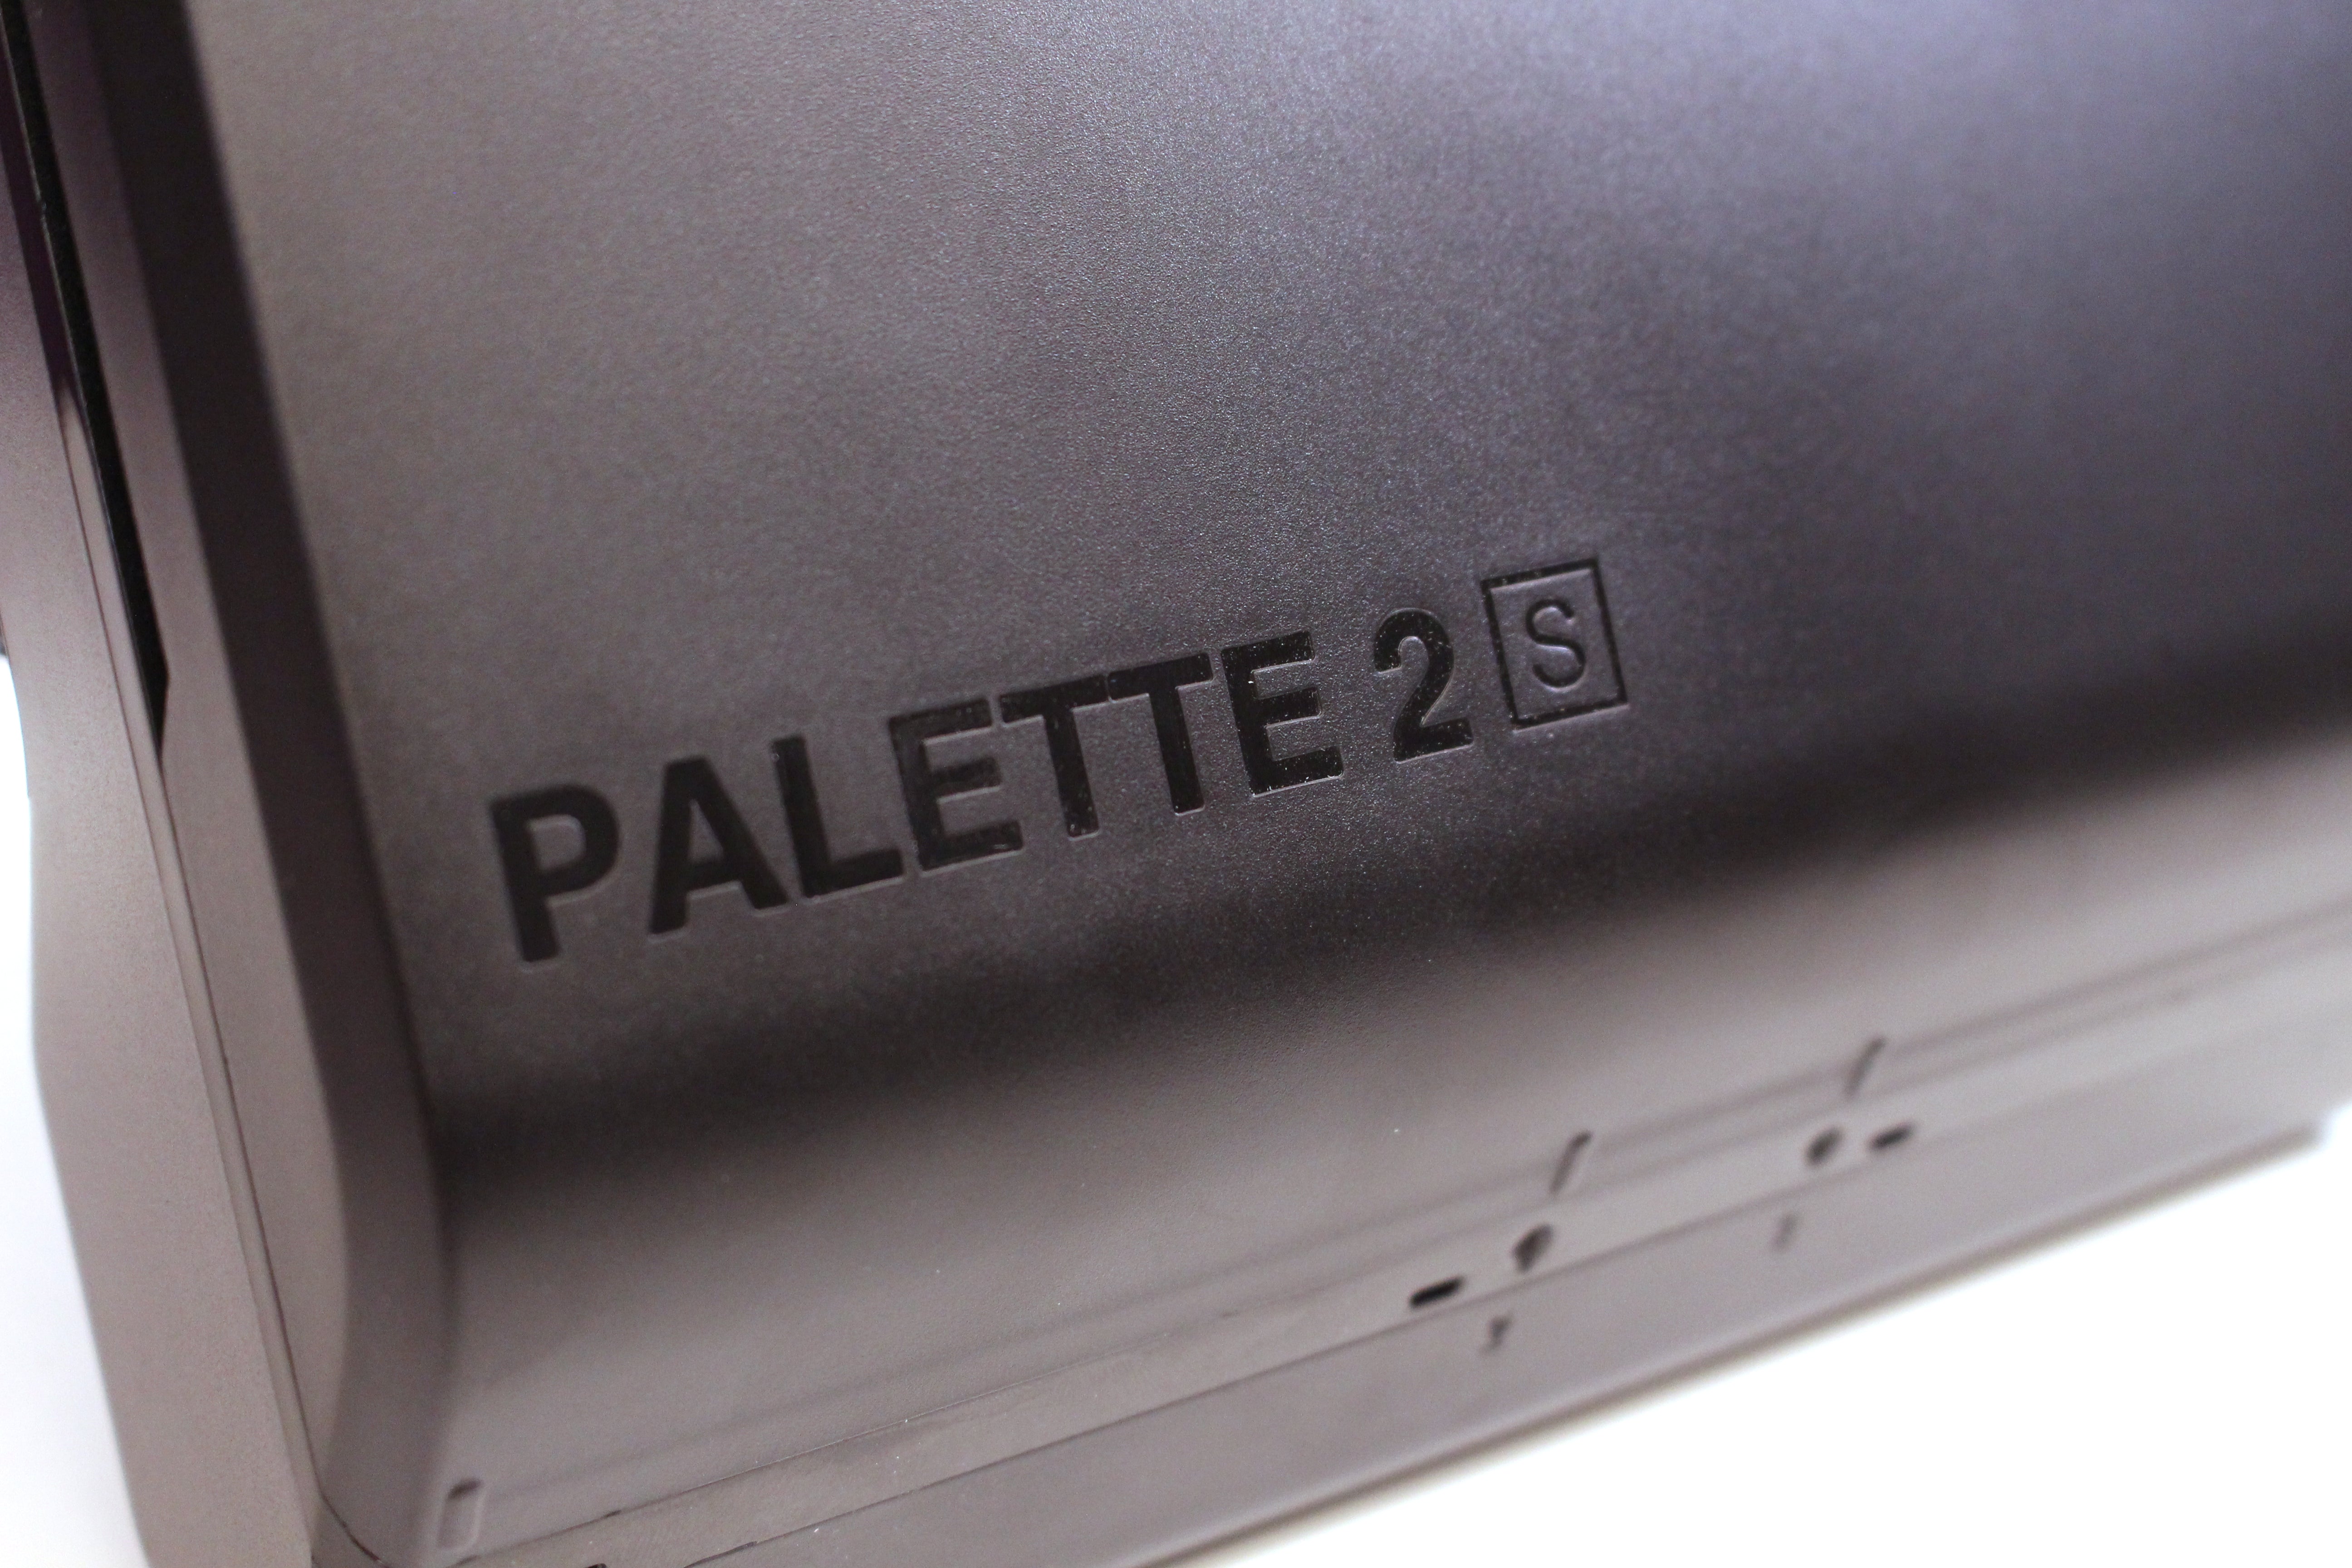 Palette 2S and Palette 2S Pro: The most reliable Palette yet Image